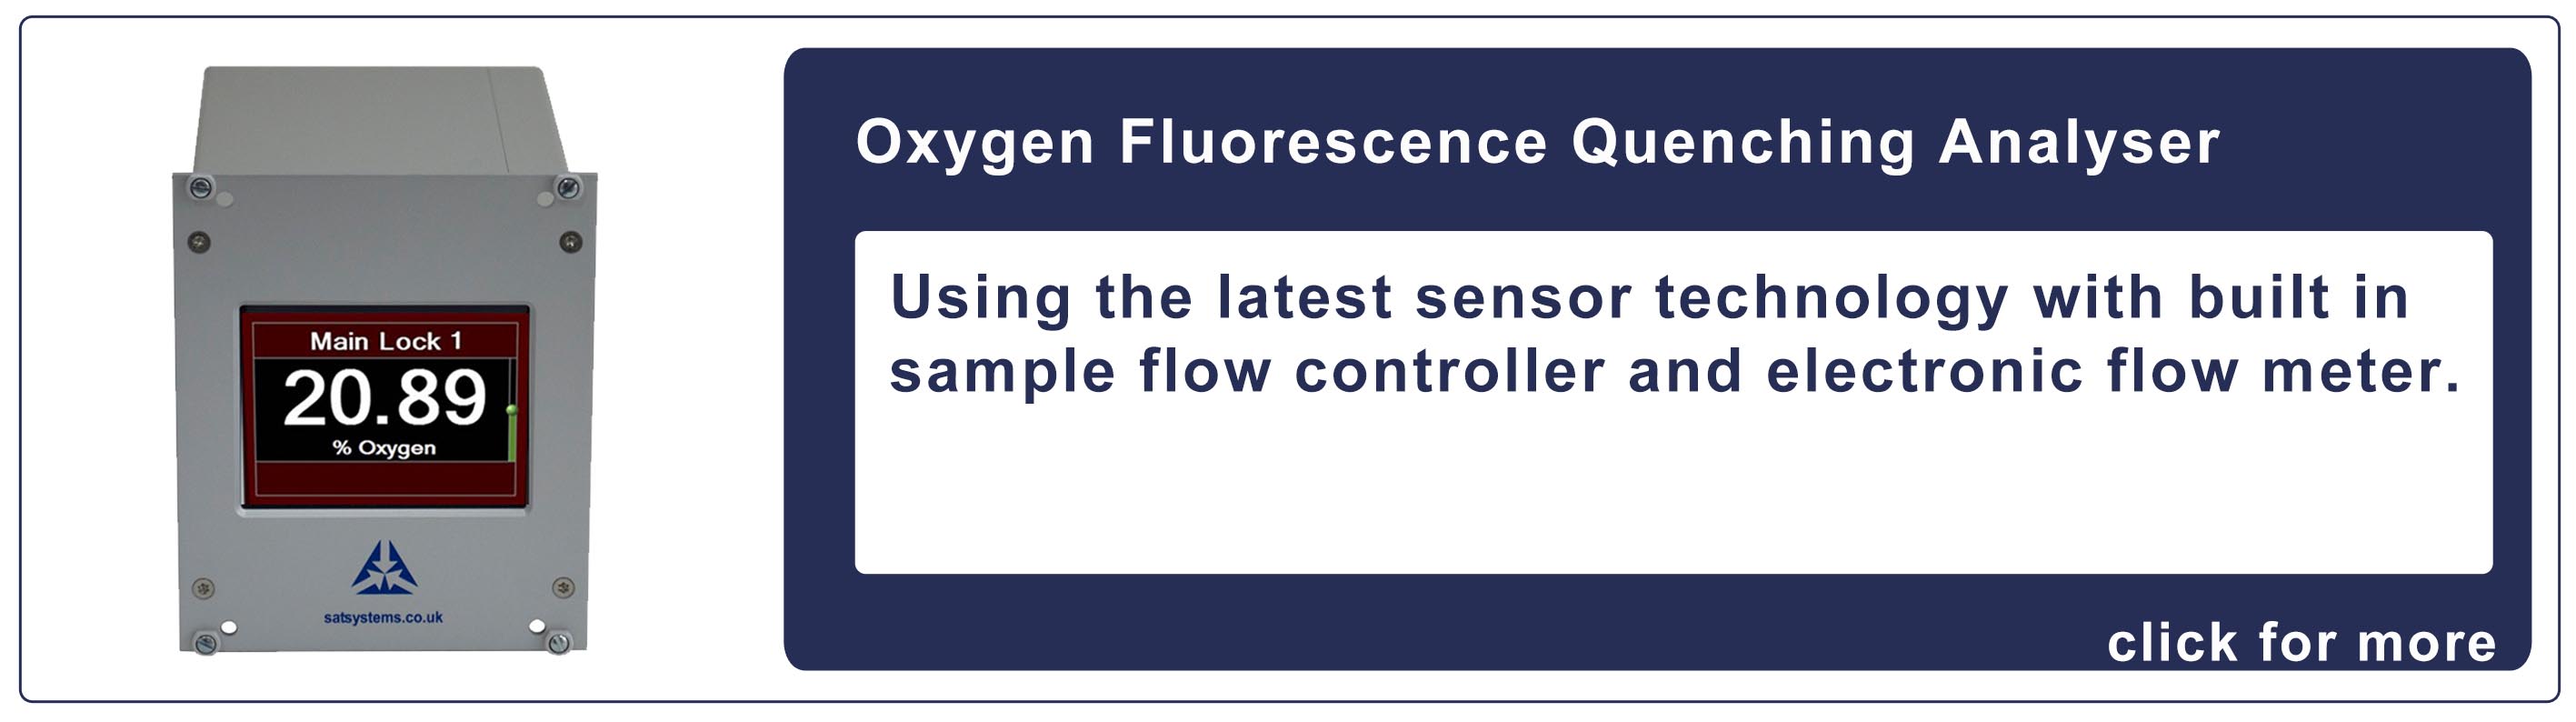 Oxygen-Fluorescence-Quenching-Analyser